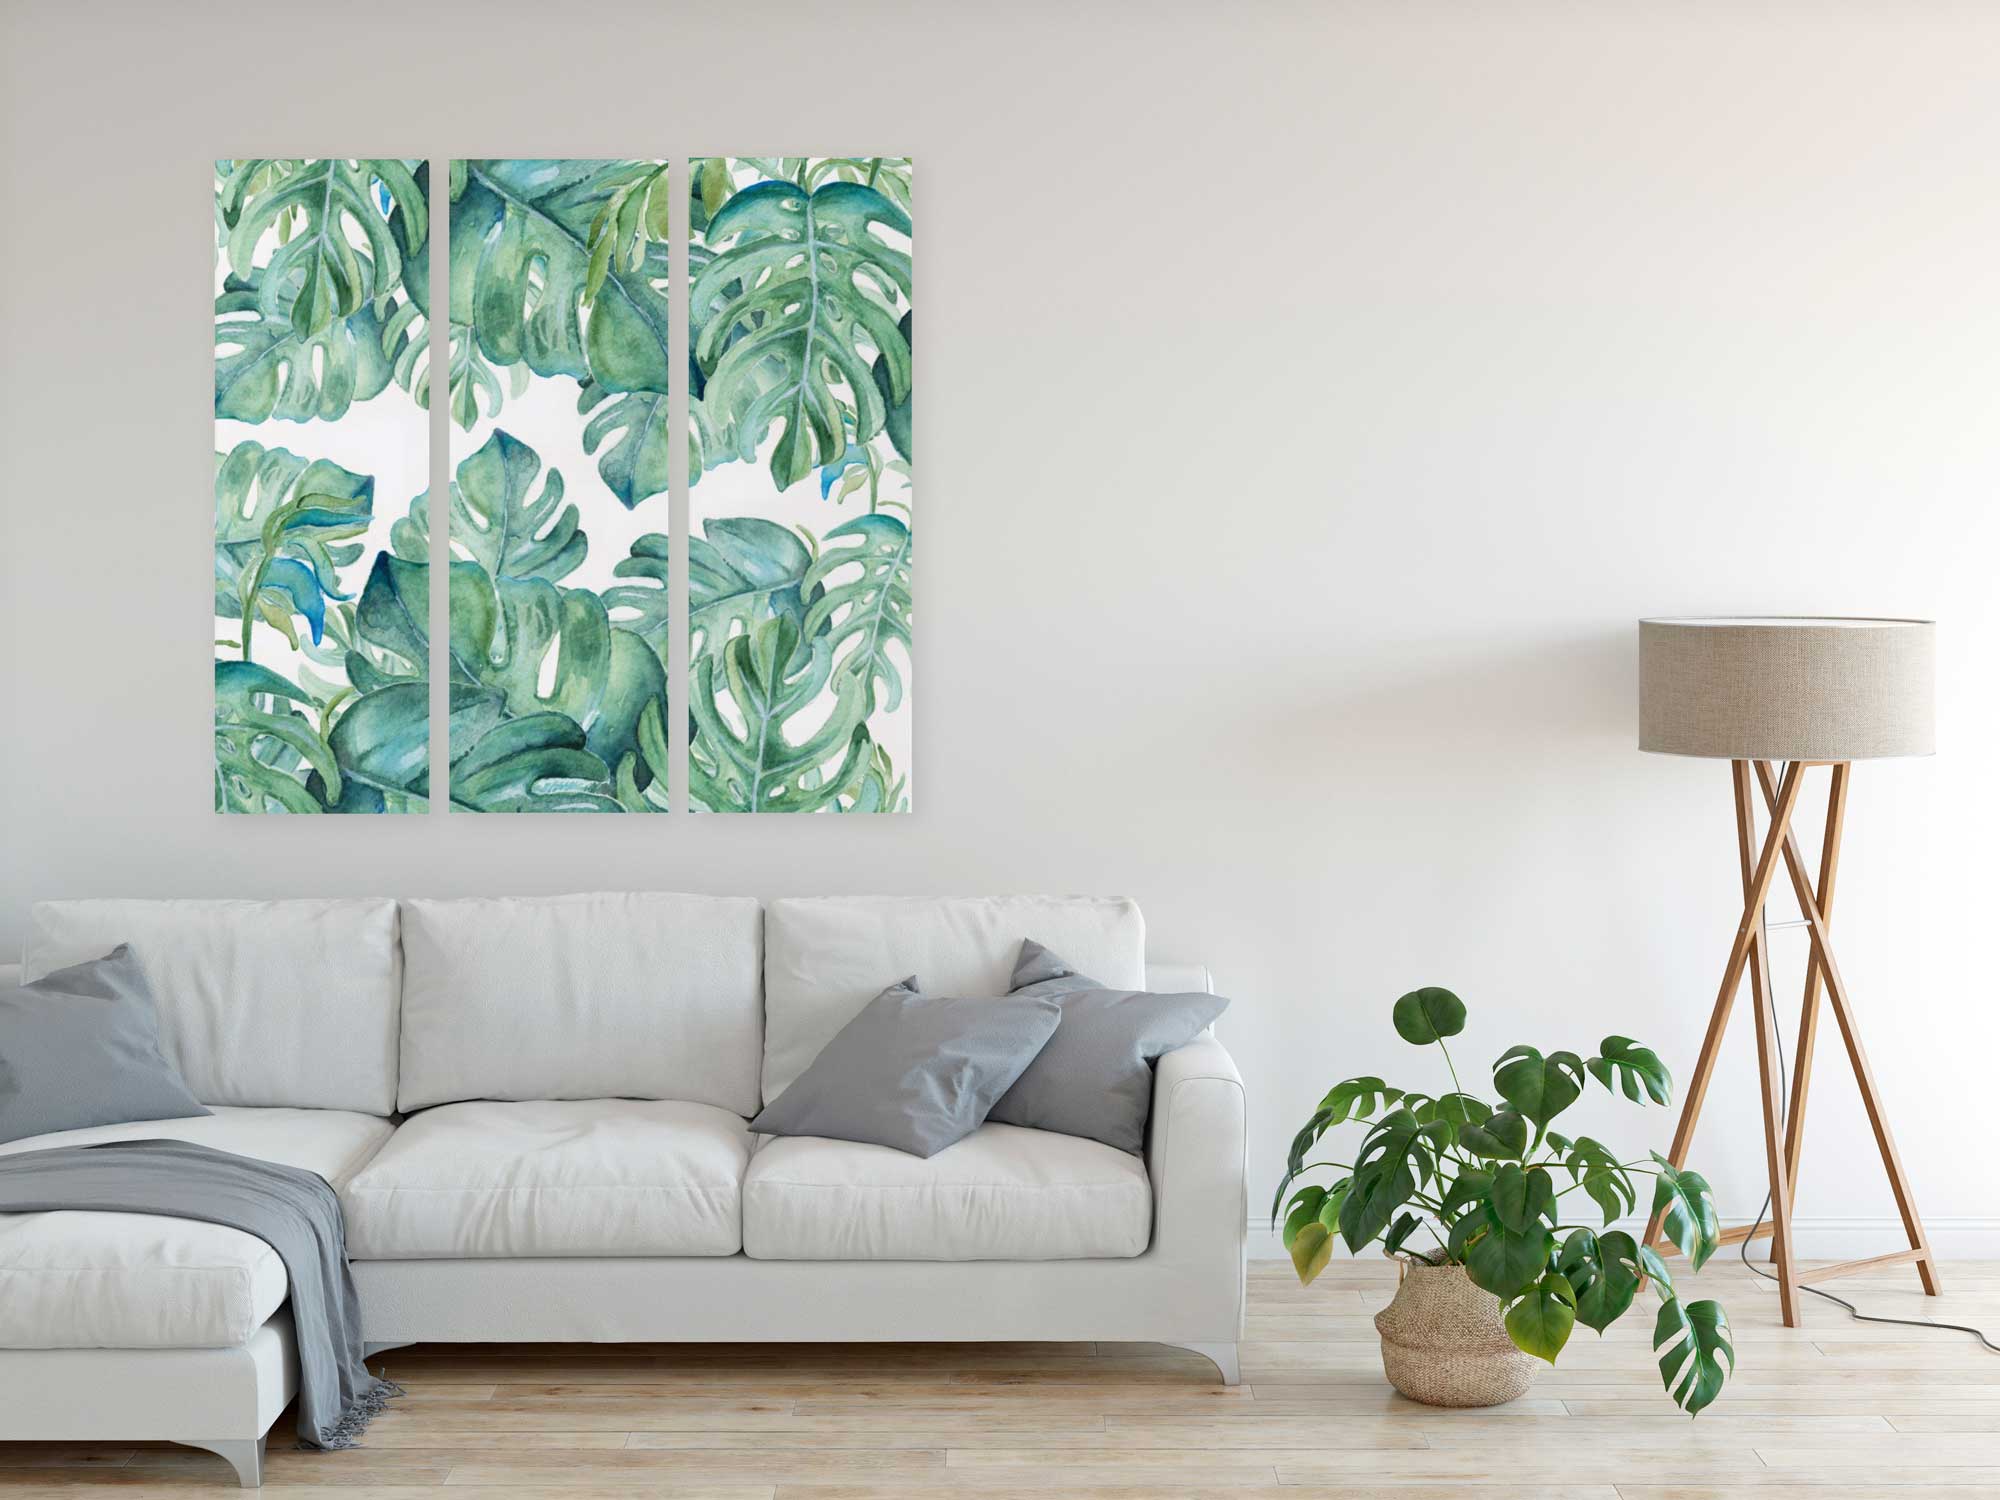 Watercolor Monstera Palm Leaves Triptych print by Victoria Grigaliunas of Victoria Rigali Designs. Tropical greenery watercolors in colorful shades of green and blues.